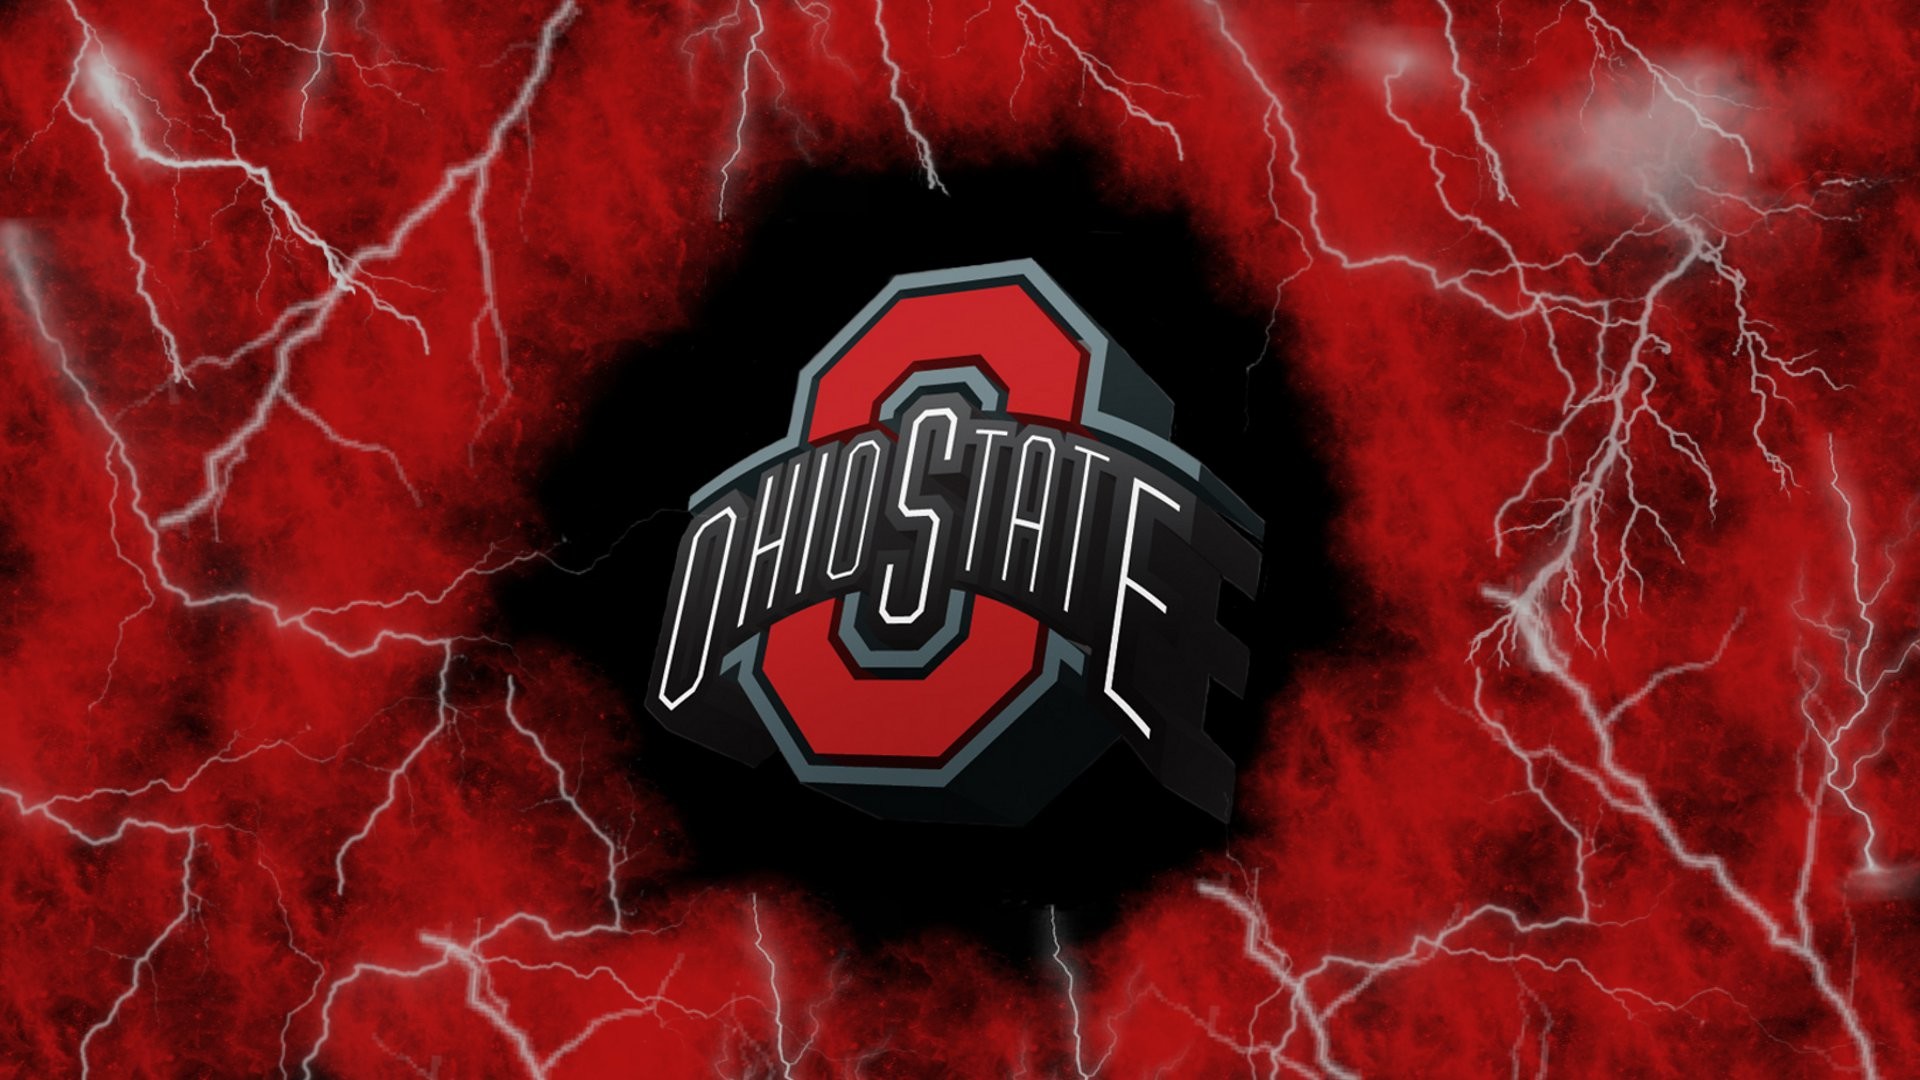 1920x1080 ohio state buckeyes background wallpaper hd 4k high definition mac apple  colourful images backgrounds download wallpaper free 1920Ã1080 Wallpaper HD